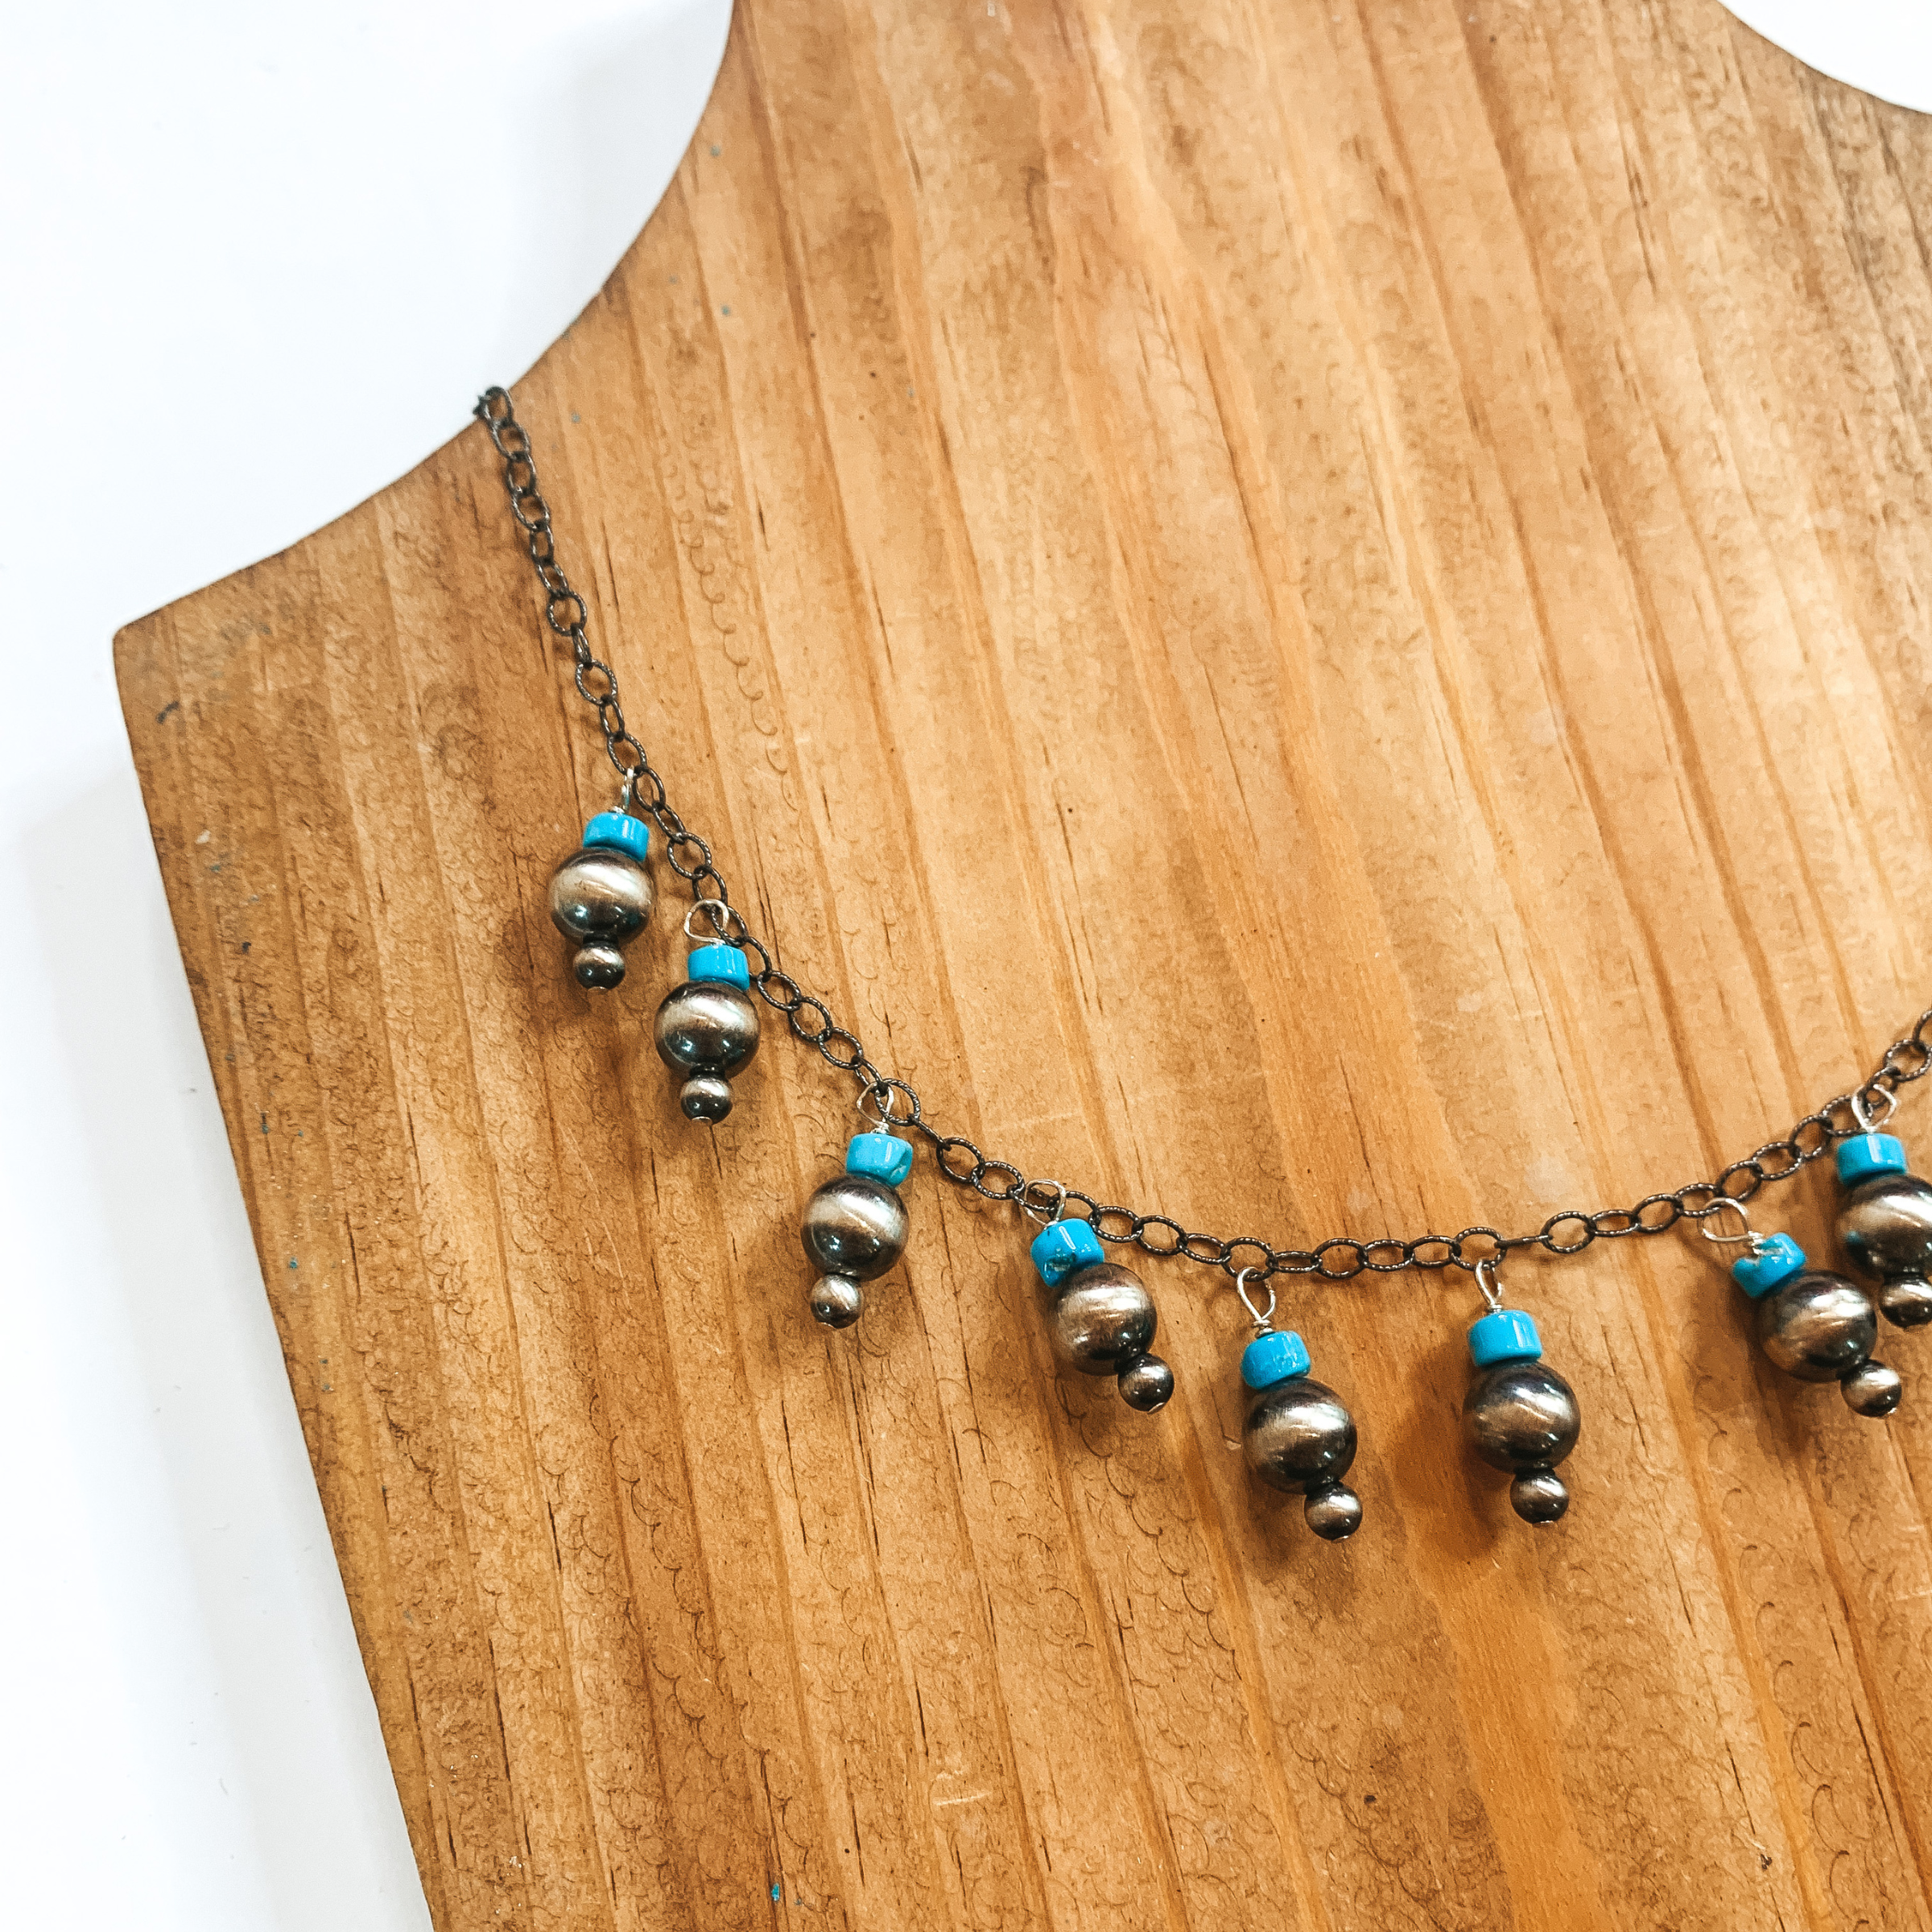 Mason Lee | Navajo Handmade Sterling Silver Chain Necklace with Kingman Turquoise and Navajo Pearl Charms - Giddy Up Glamour Boutique